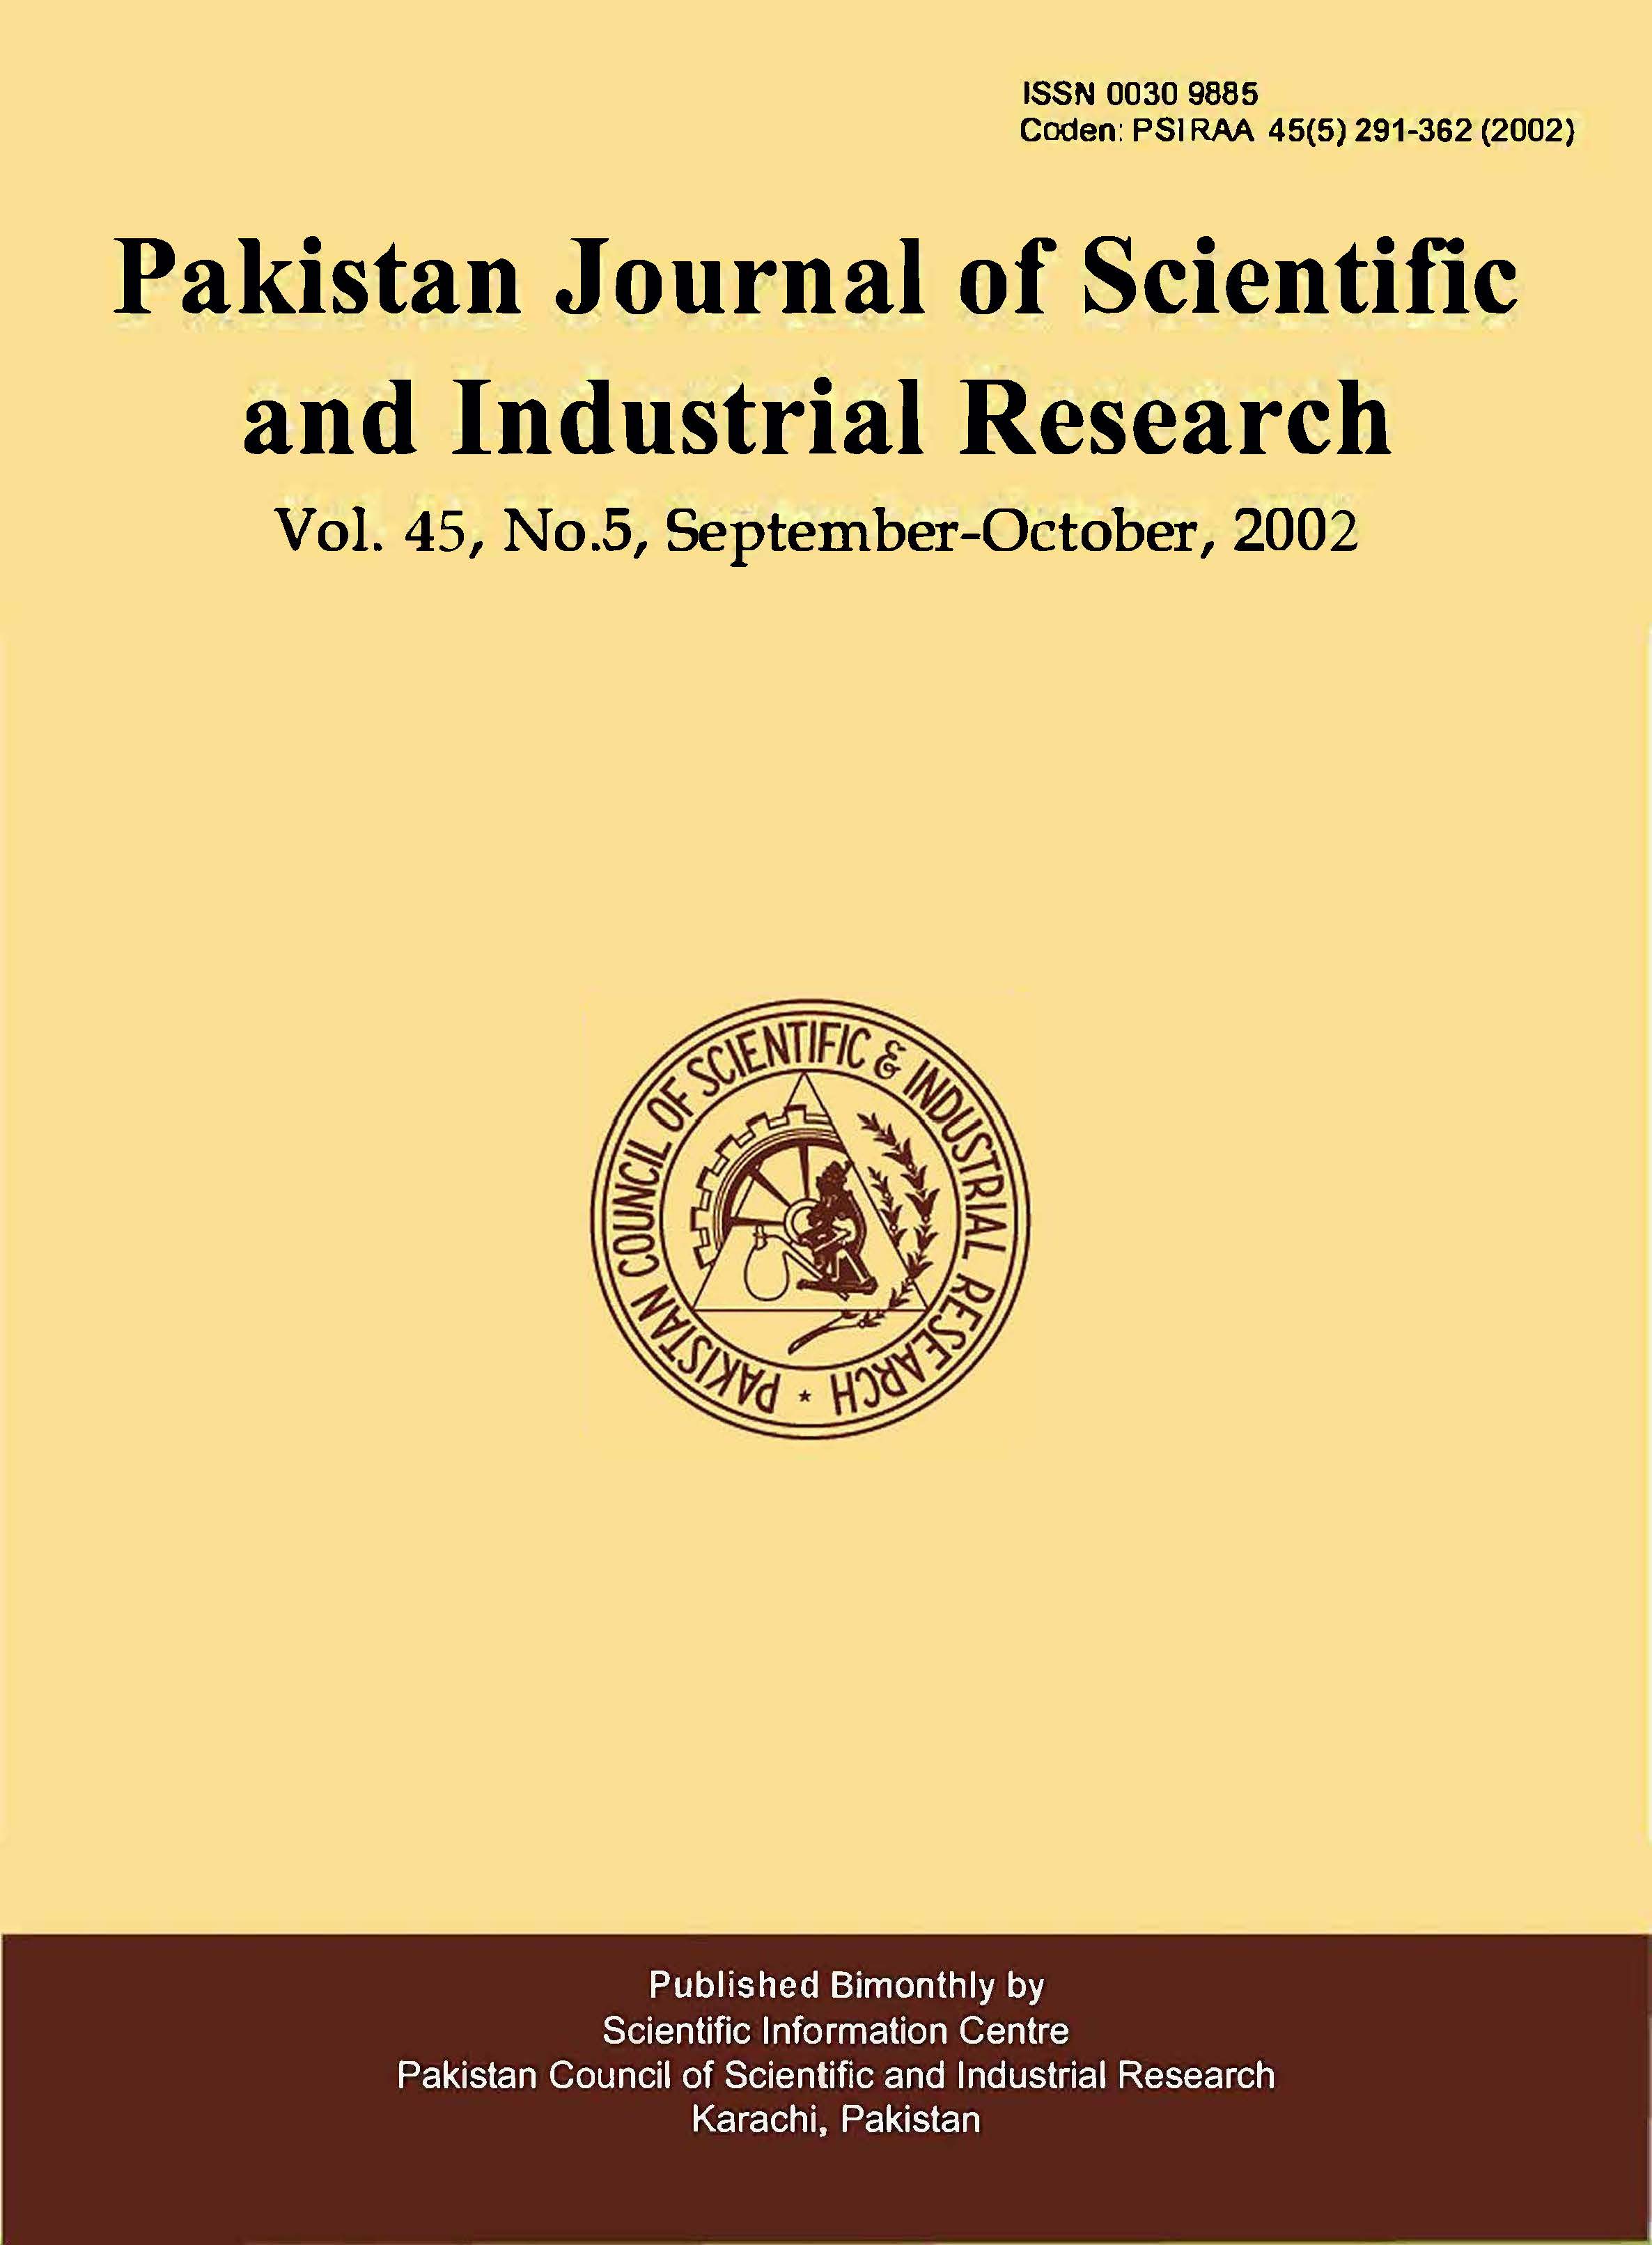 					View Vol. 45 No. 5 (2002): Pakistan Journal of Scientific and Industrial Research
				